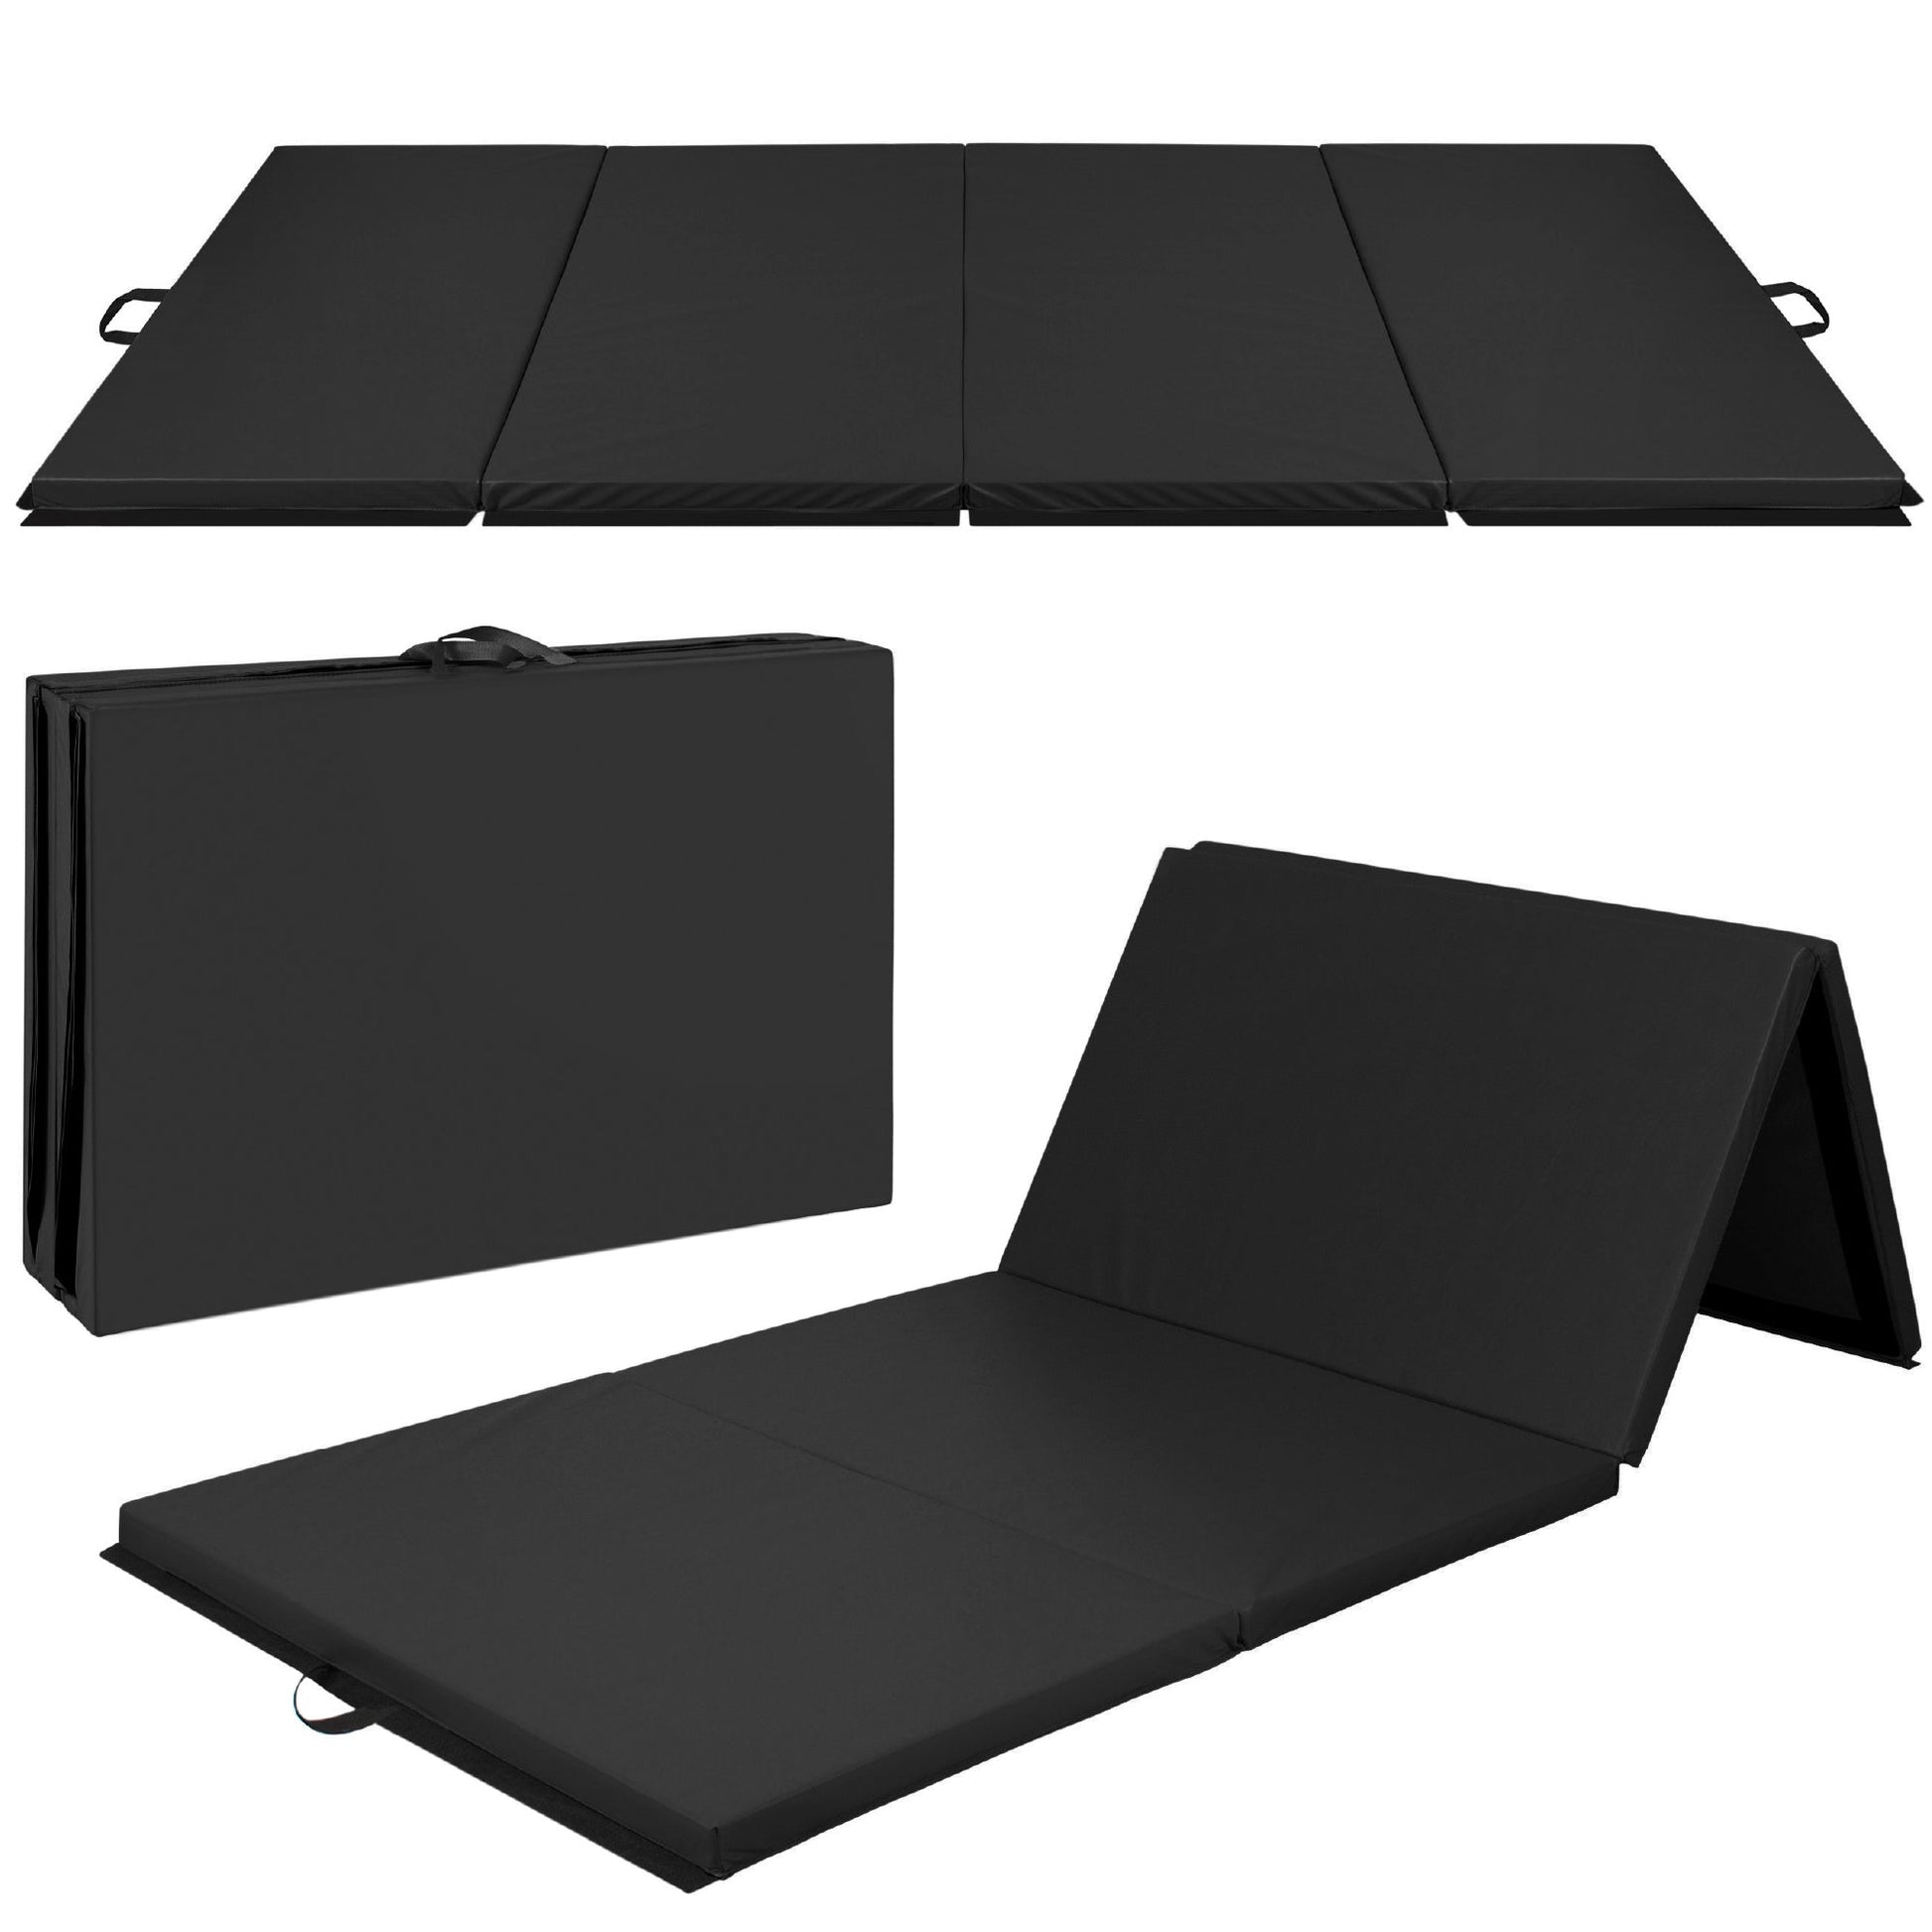 Folding Exercise Fitness Workout Gym Floor Mat w/ Handles